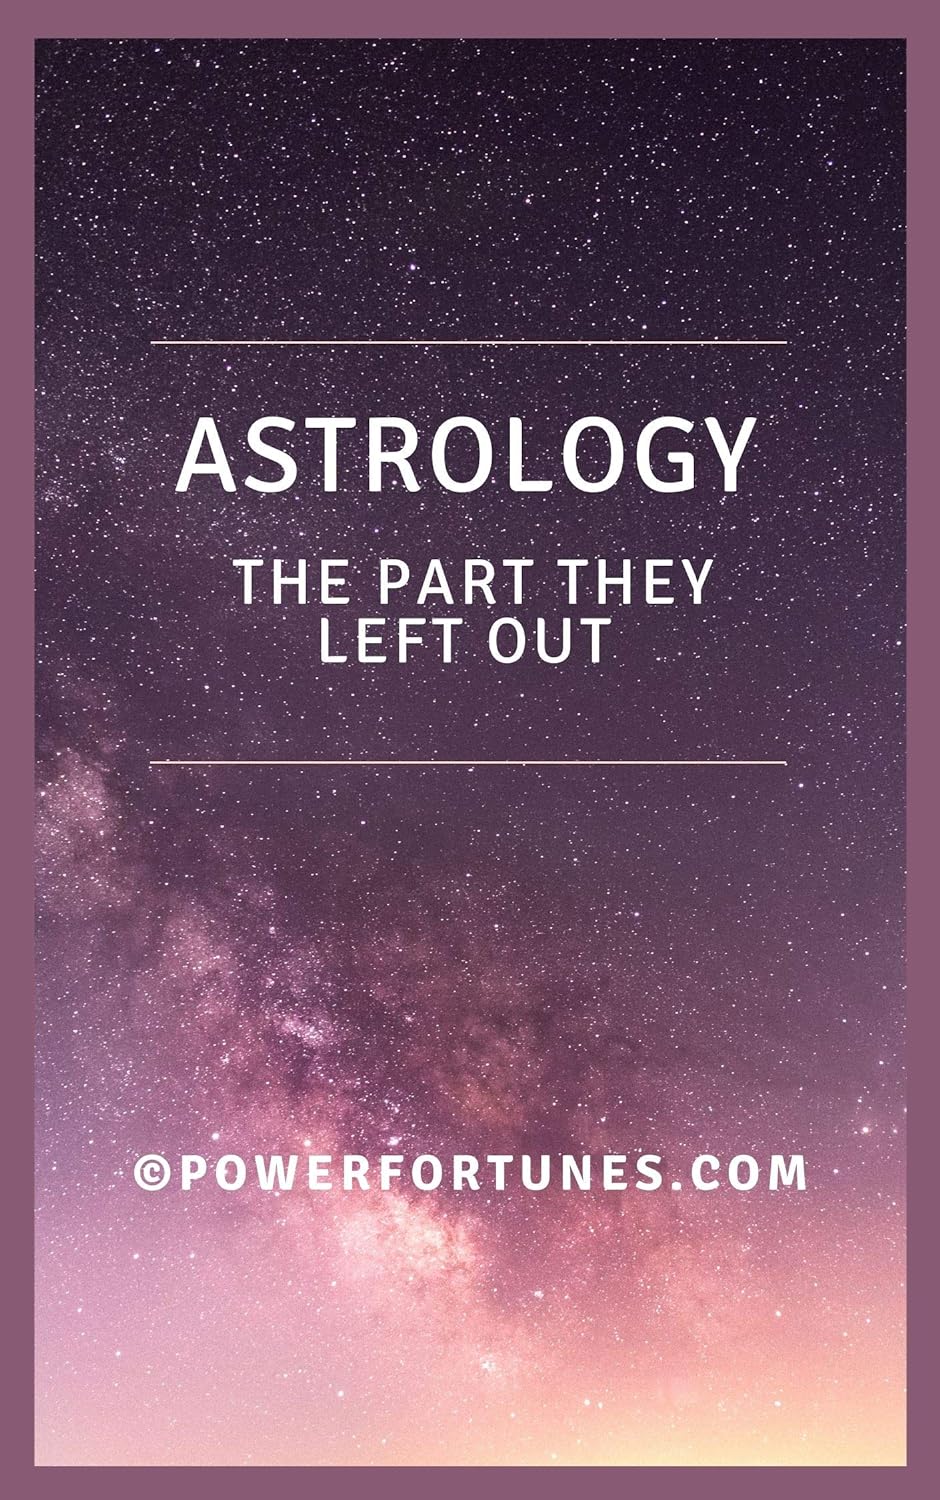 Astrology. The Part They Left Out: Not Another Run of the Mill, Master Class in Astrology.